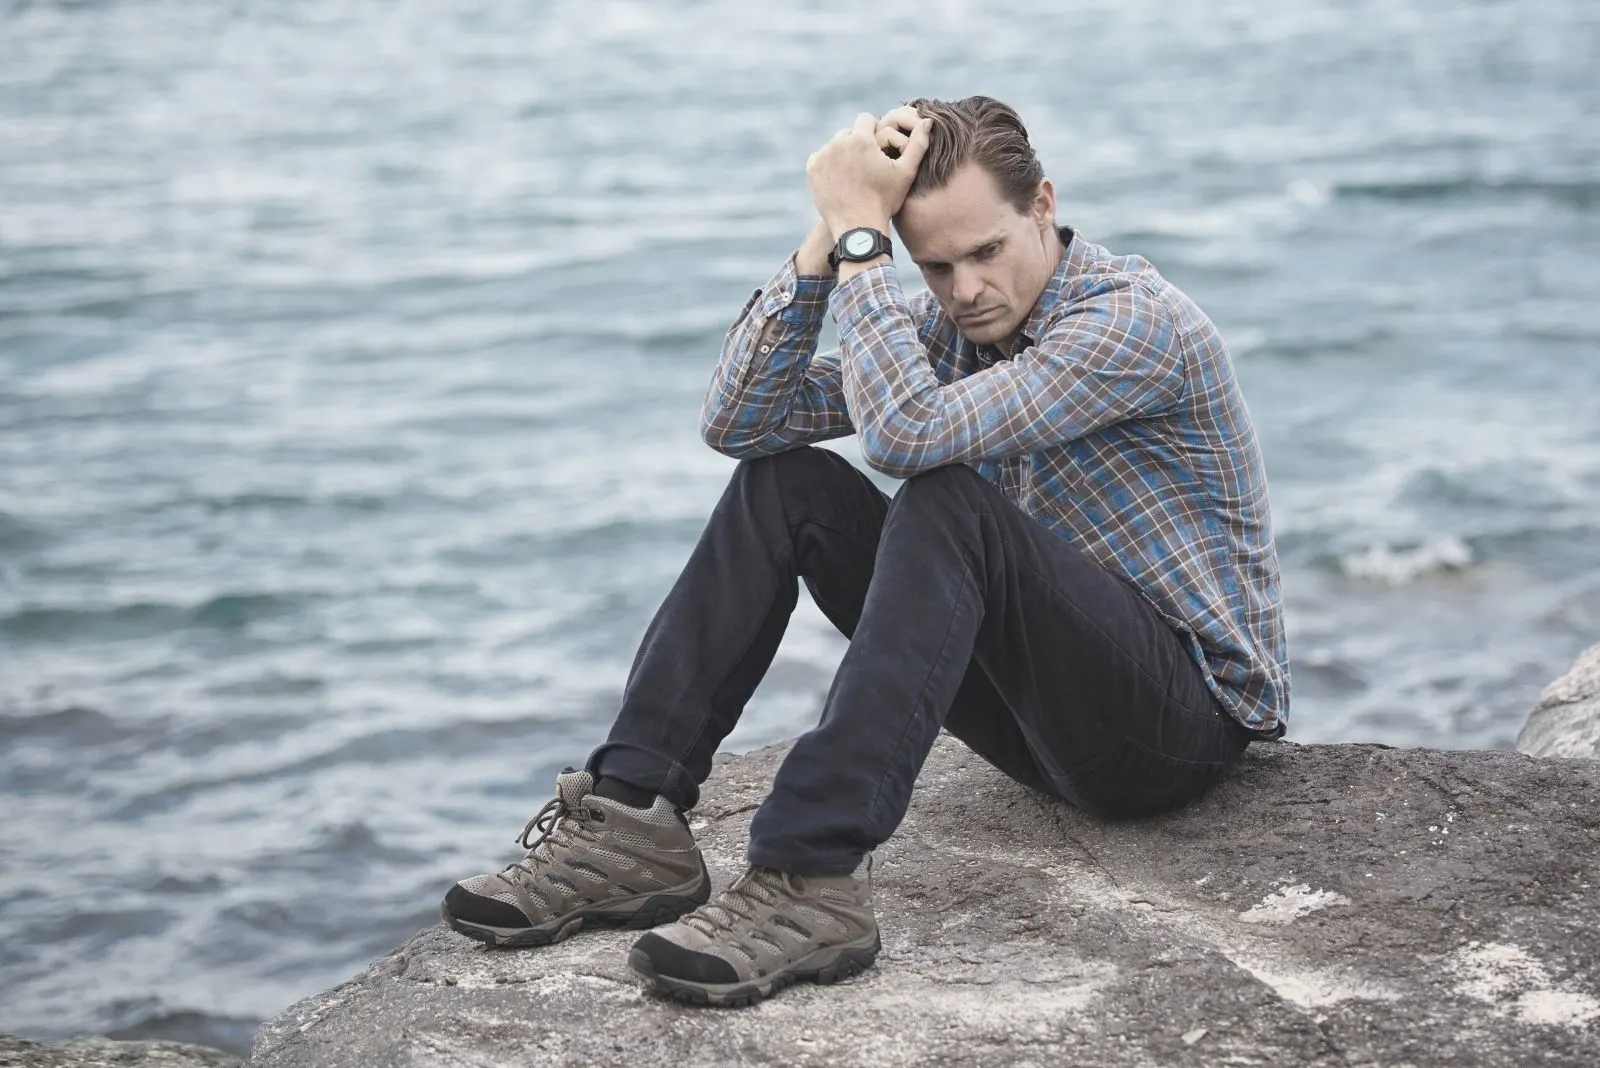 man sitting on the rock near the body of water wearing blue and maroon plaid shirt